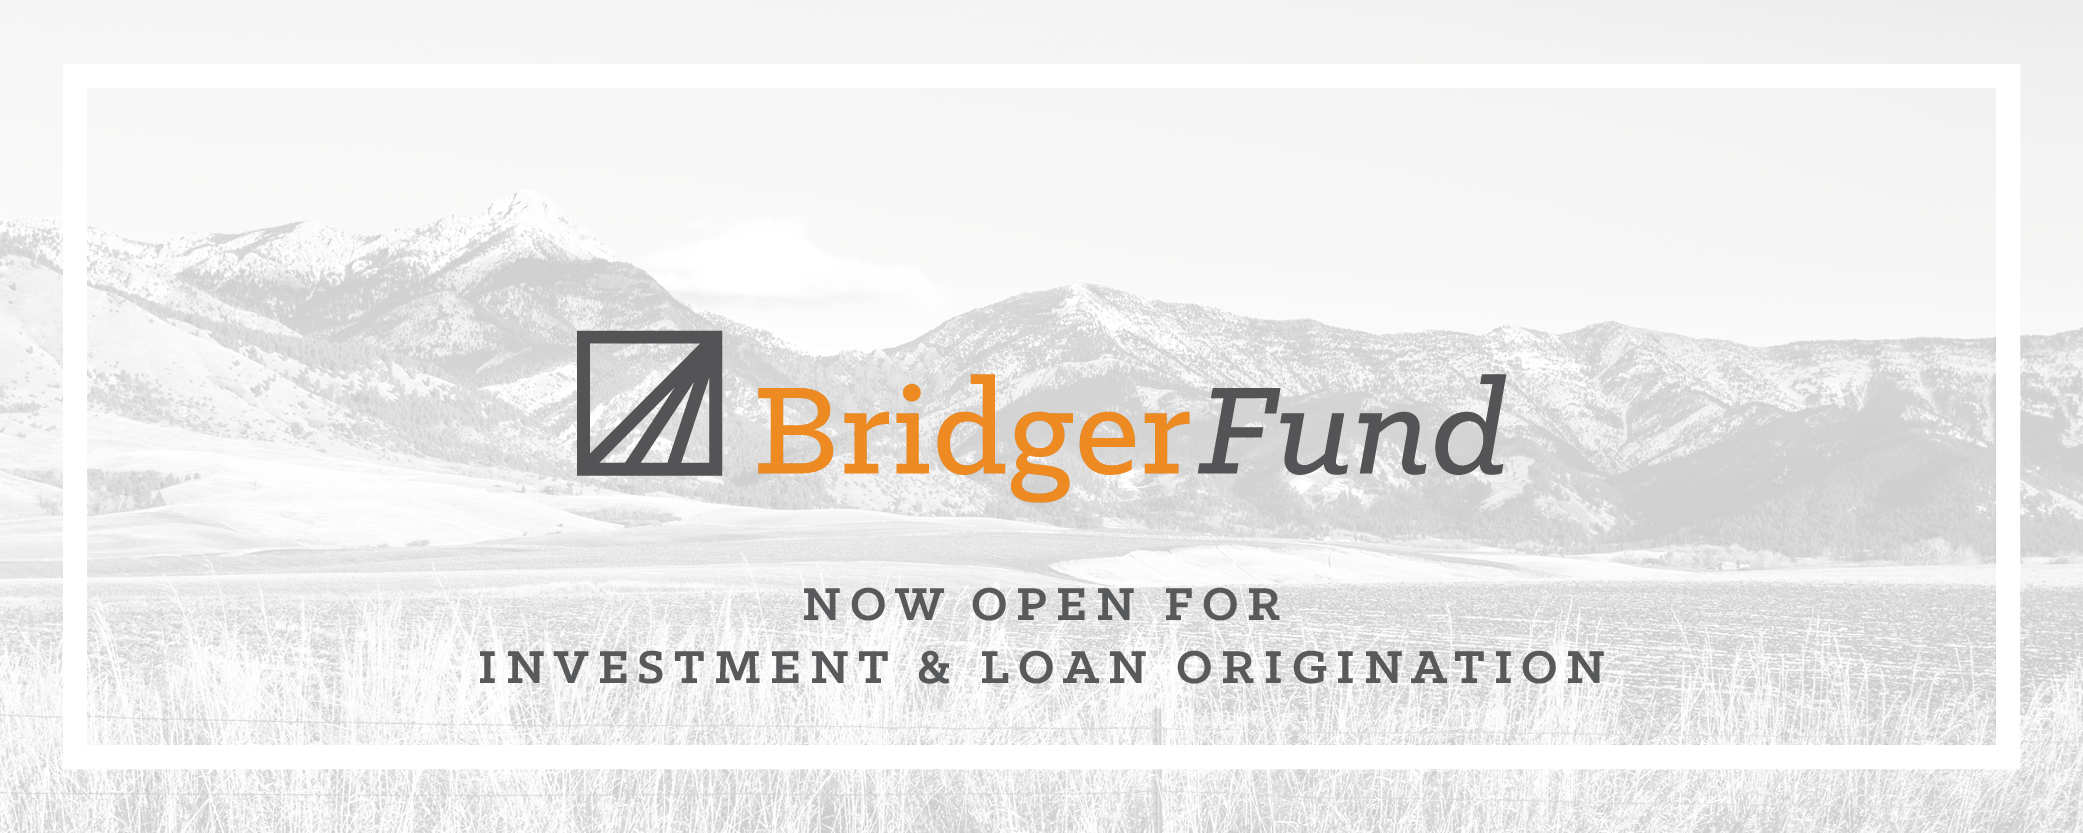 Bridger fund open to investment and loan origination